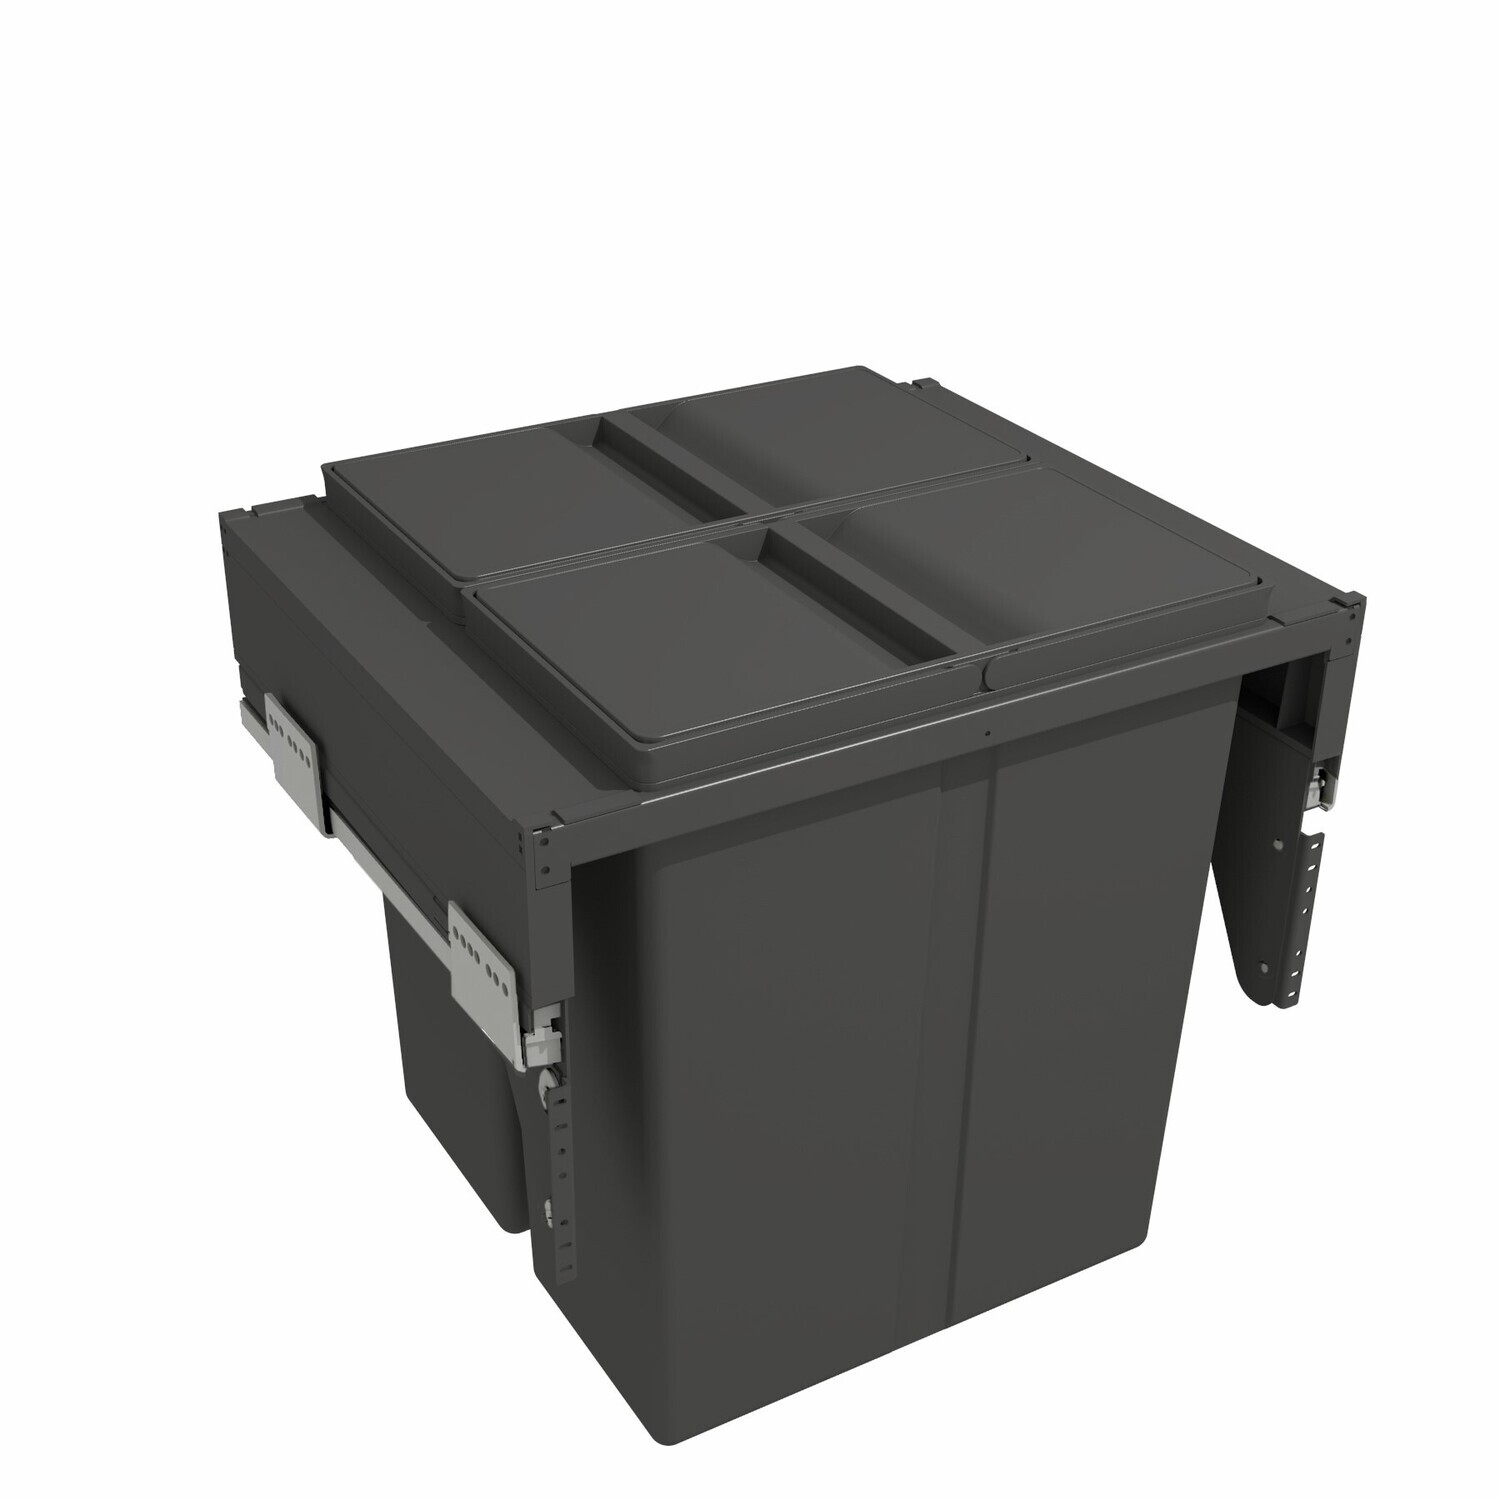 80 litre Anthracite Bin to Suit 600mm Cabinet.